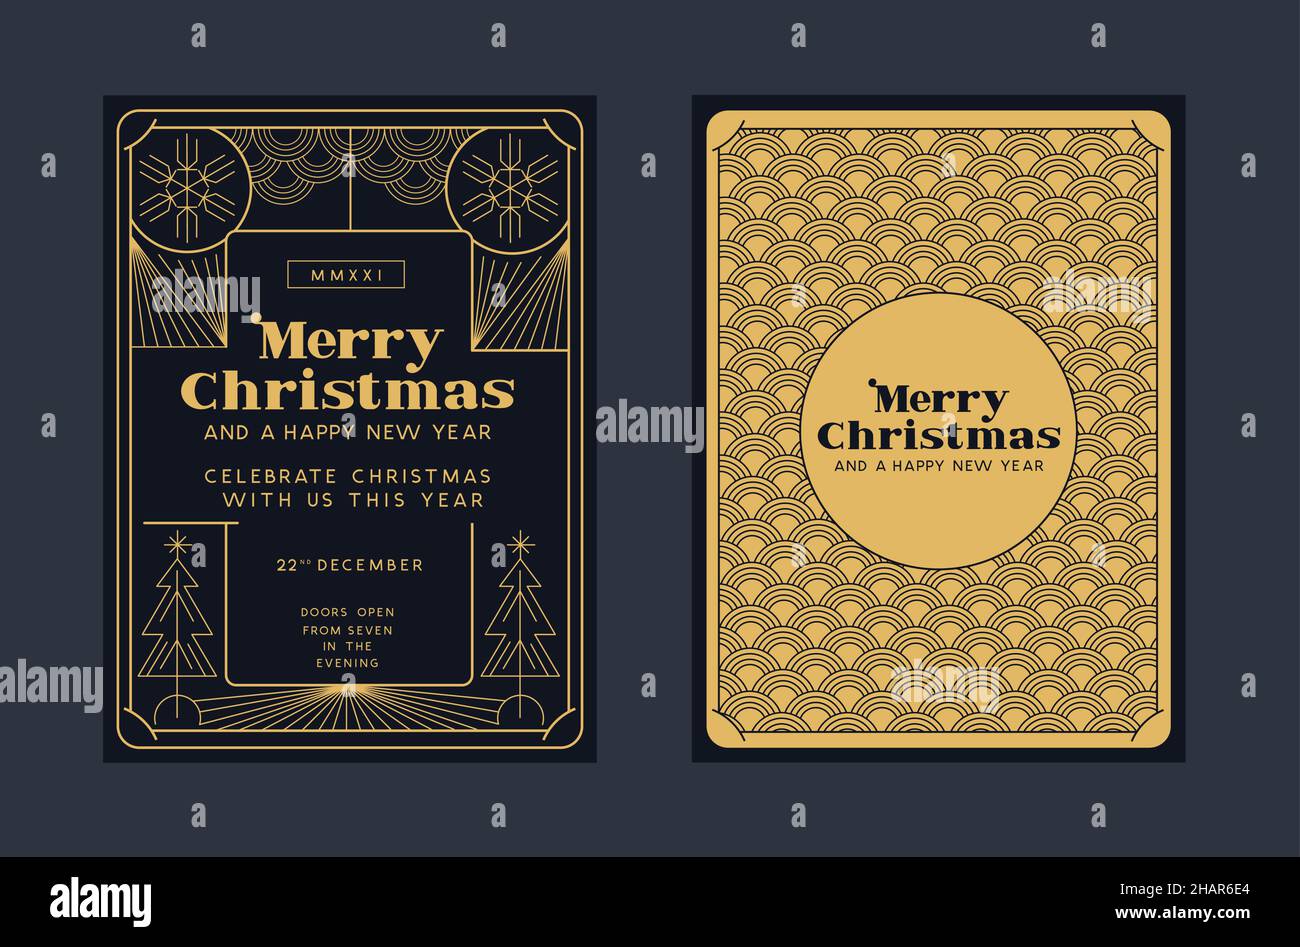 Christmas grettings design background with 1920's and 1930's art deco style gold detailing. Festive frame vector illustration. Stock Vector